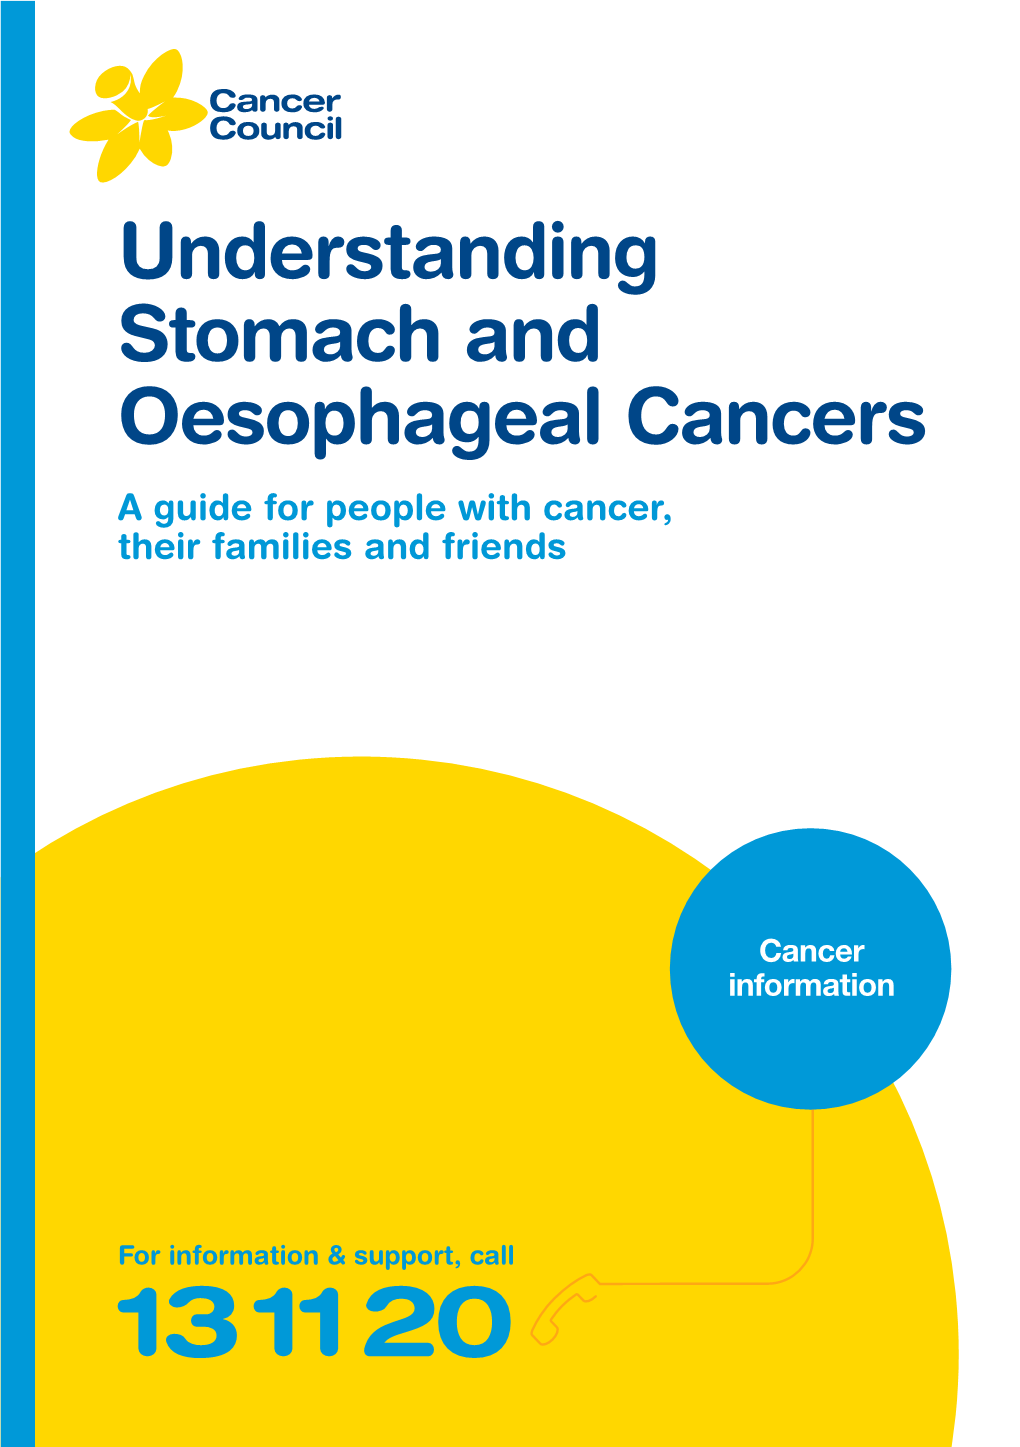 Understanding Stomach and Oesophageal Cancers a Guide for People with Cancer, Their Families and Friends